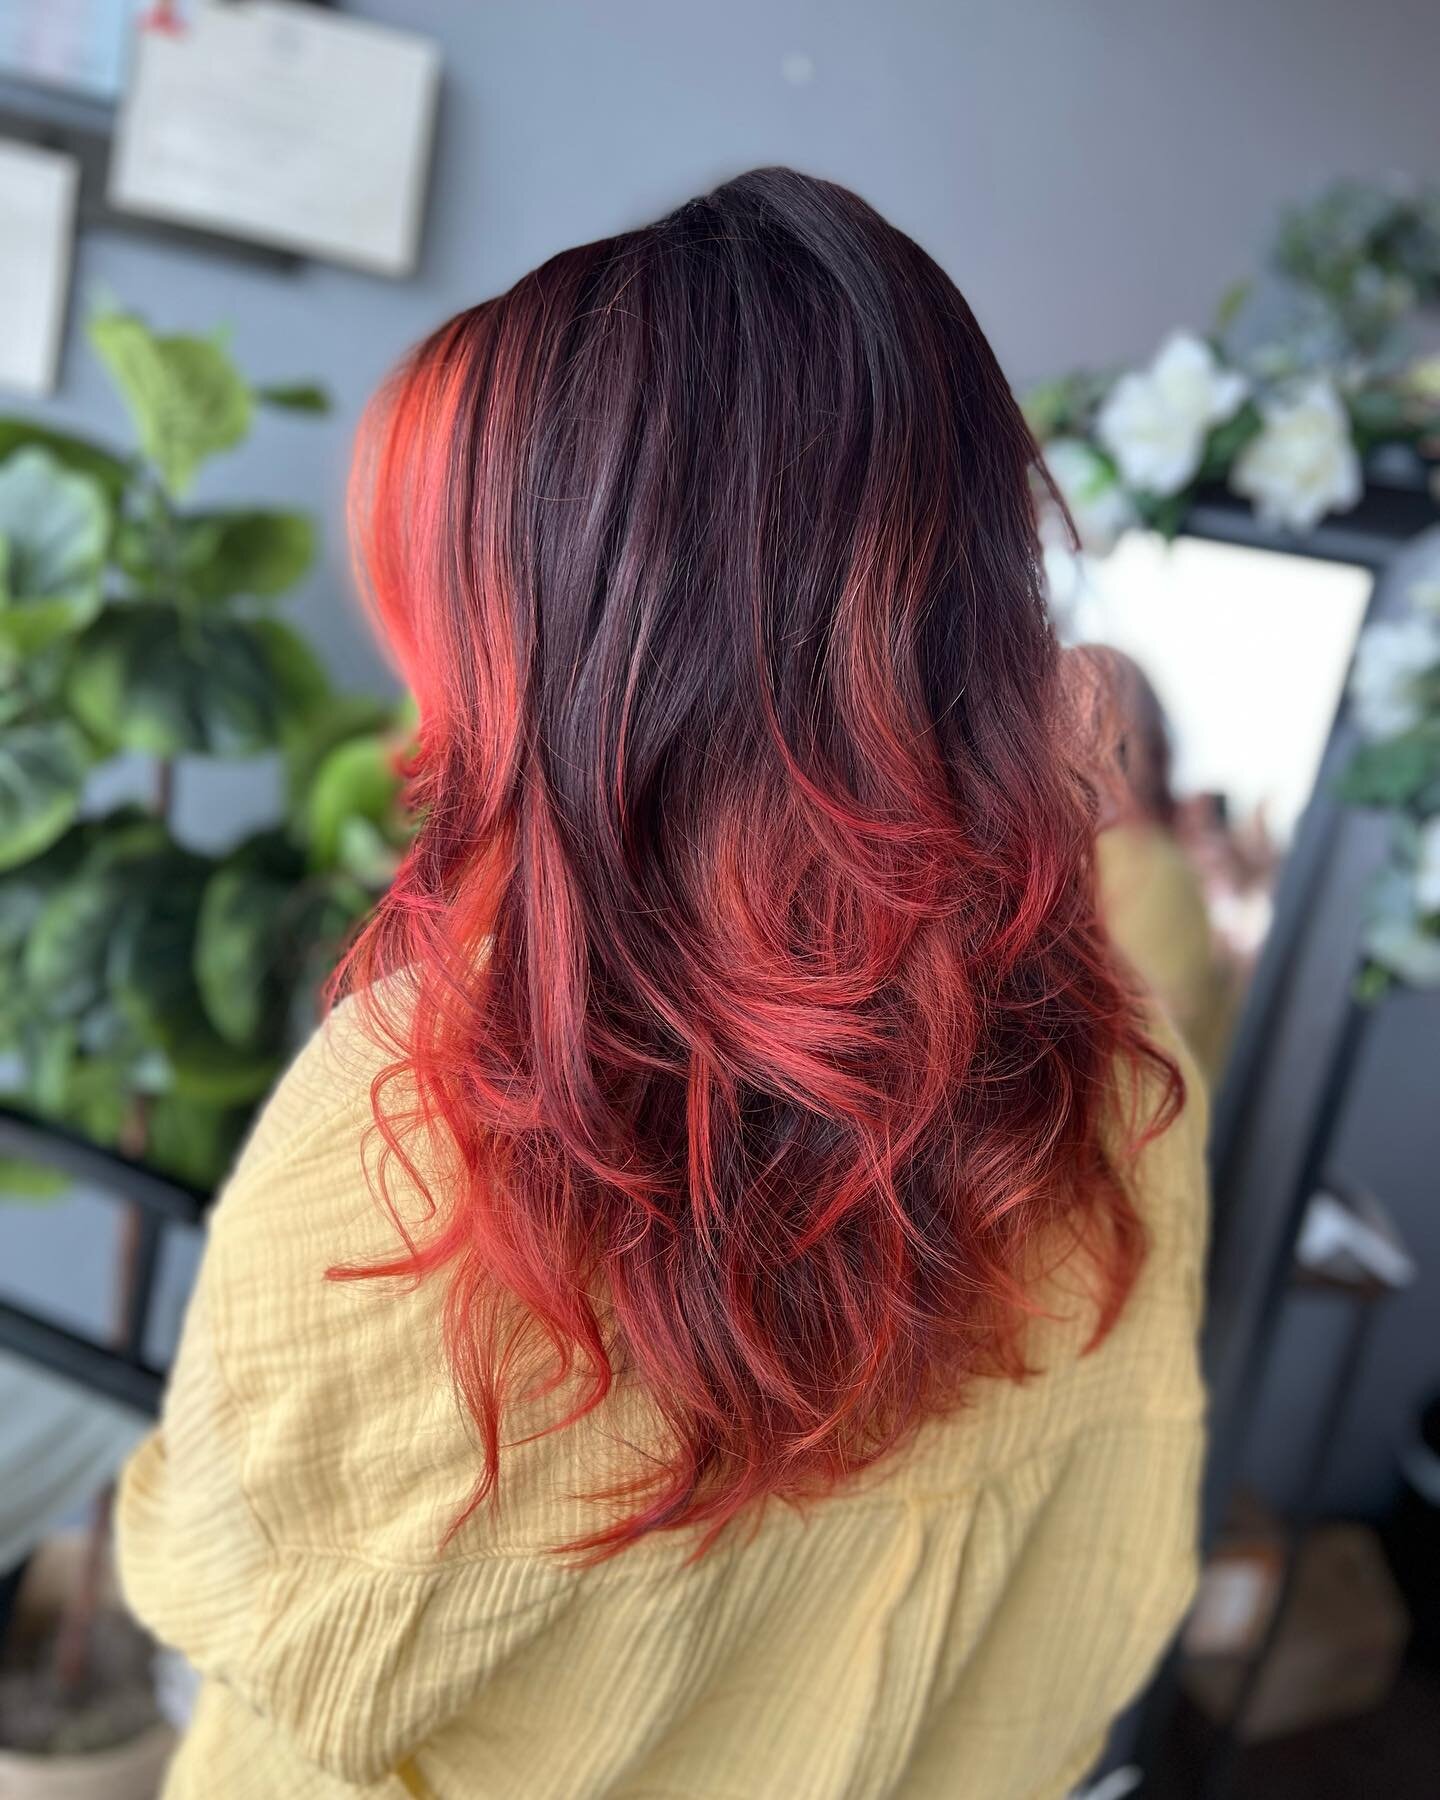 Red hair who cares! ❤️&zwj;🔥❤️&zwj;🔥❤️&zwj;🔥 
Amazing color done by Tara! @layersgrl_for_the_love_of_hair 
.
.
.
.
.
.
.
.
.
.
.

#beauty #hairoftheday #hairstyles #beachywaves #wellaplex #hairinspo #balayage #behindthechair #paintedhair #prettyha